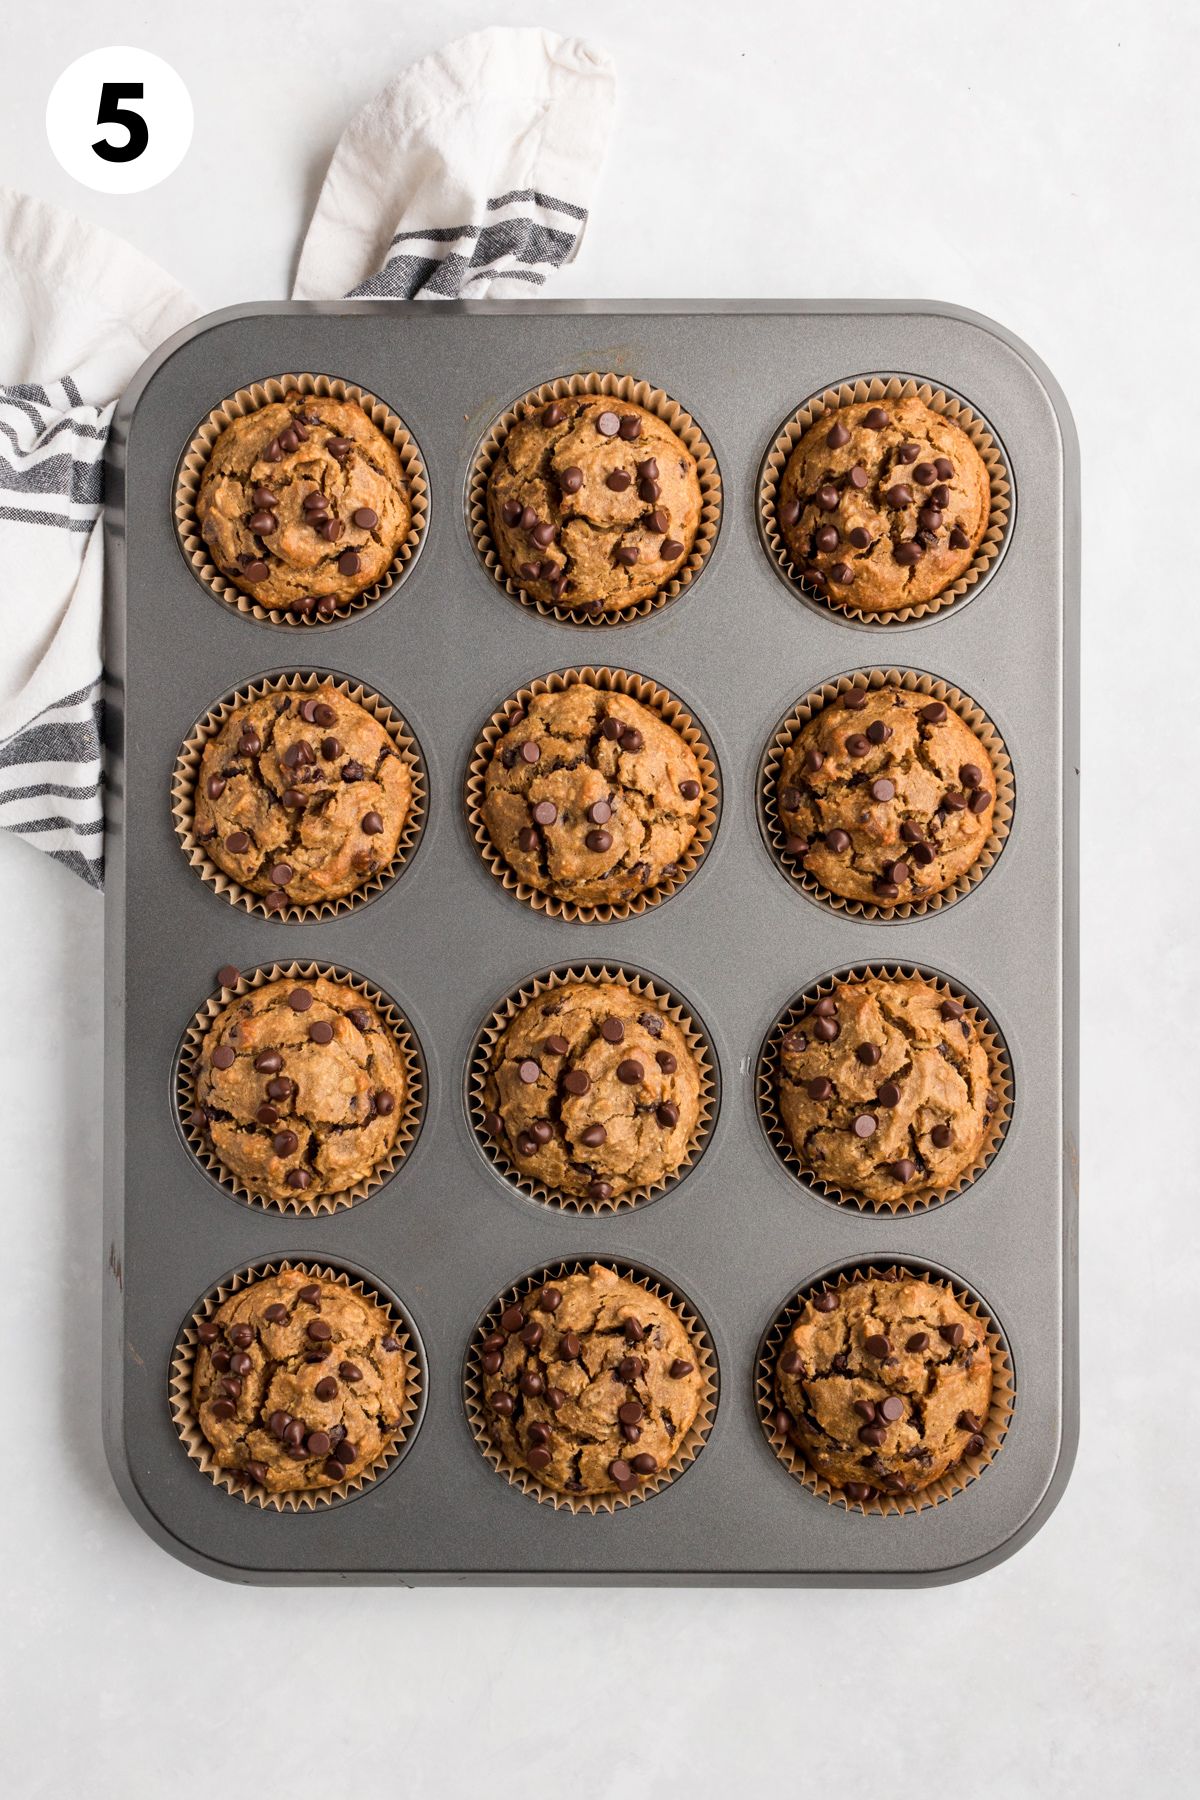 Butternut squash muffins with chocolate chips in a muffin pan after baking.